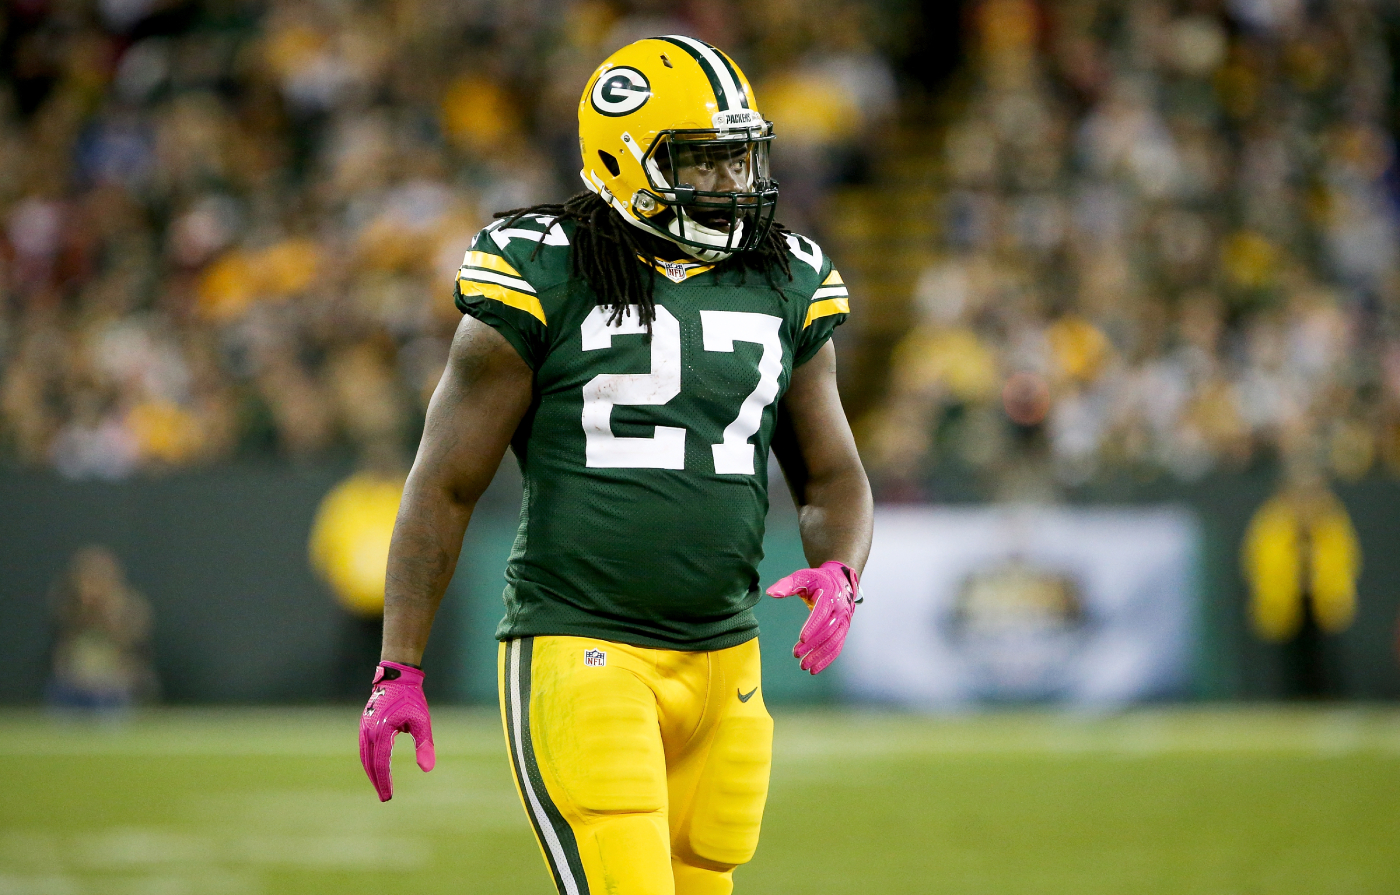 Eddie Lacy is back in the news thanks to James Harden.